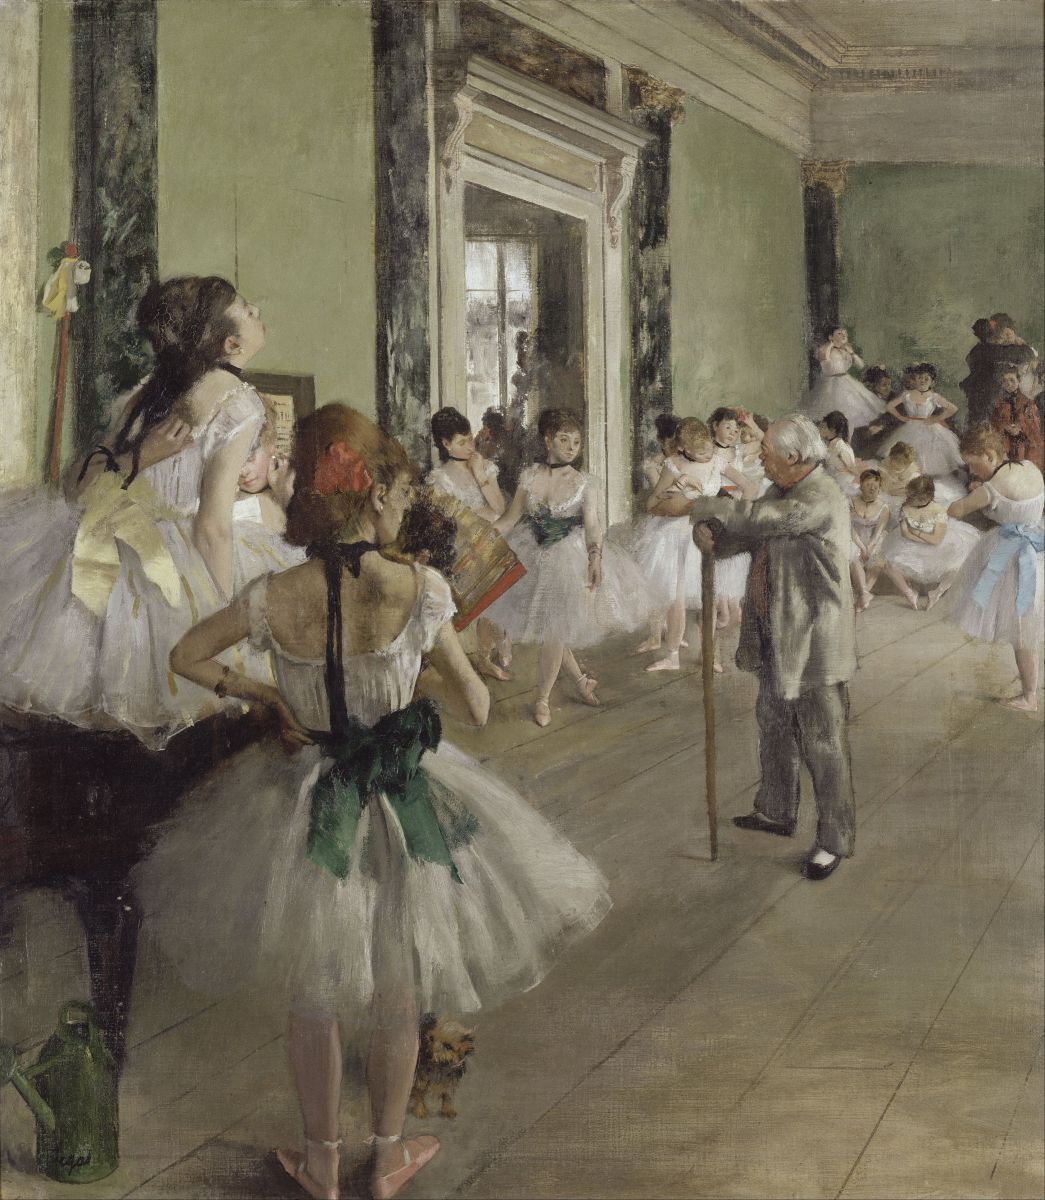 Edgar Degas: A Master of Impressionism and Modern Realism